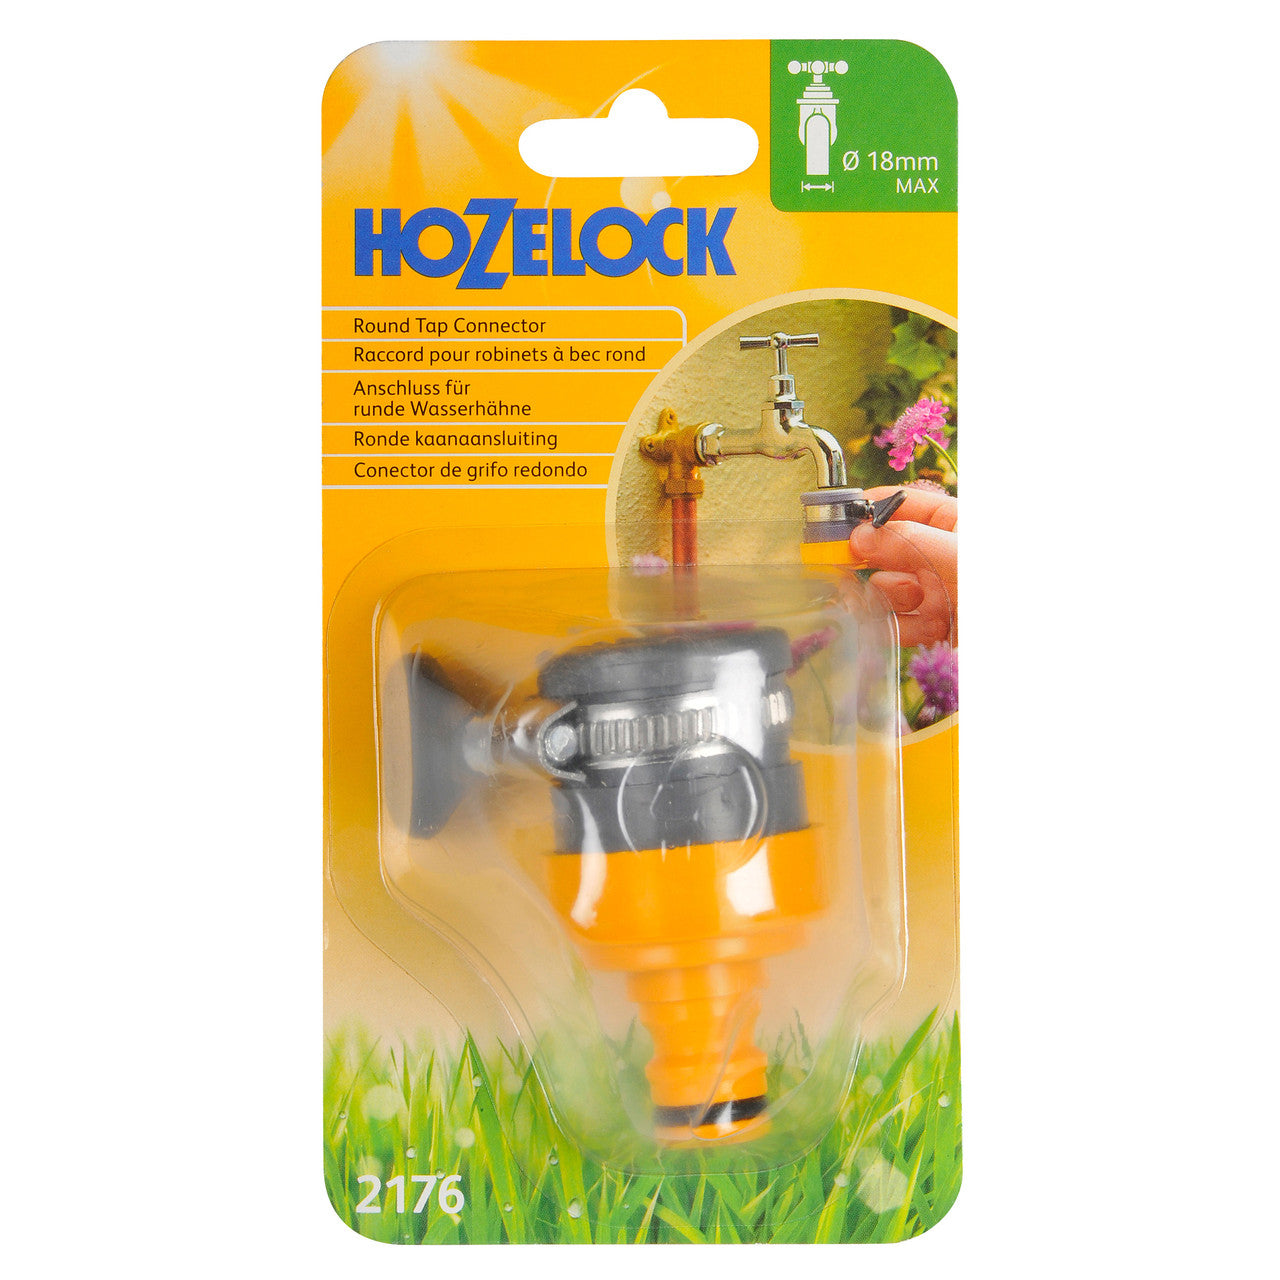 Hozelock 2176 Round Mixer Tap Connector 14 - 18mm